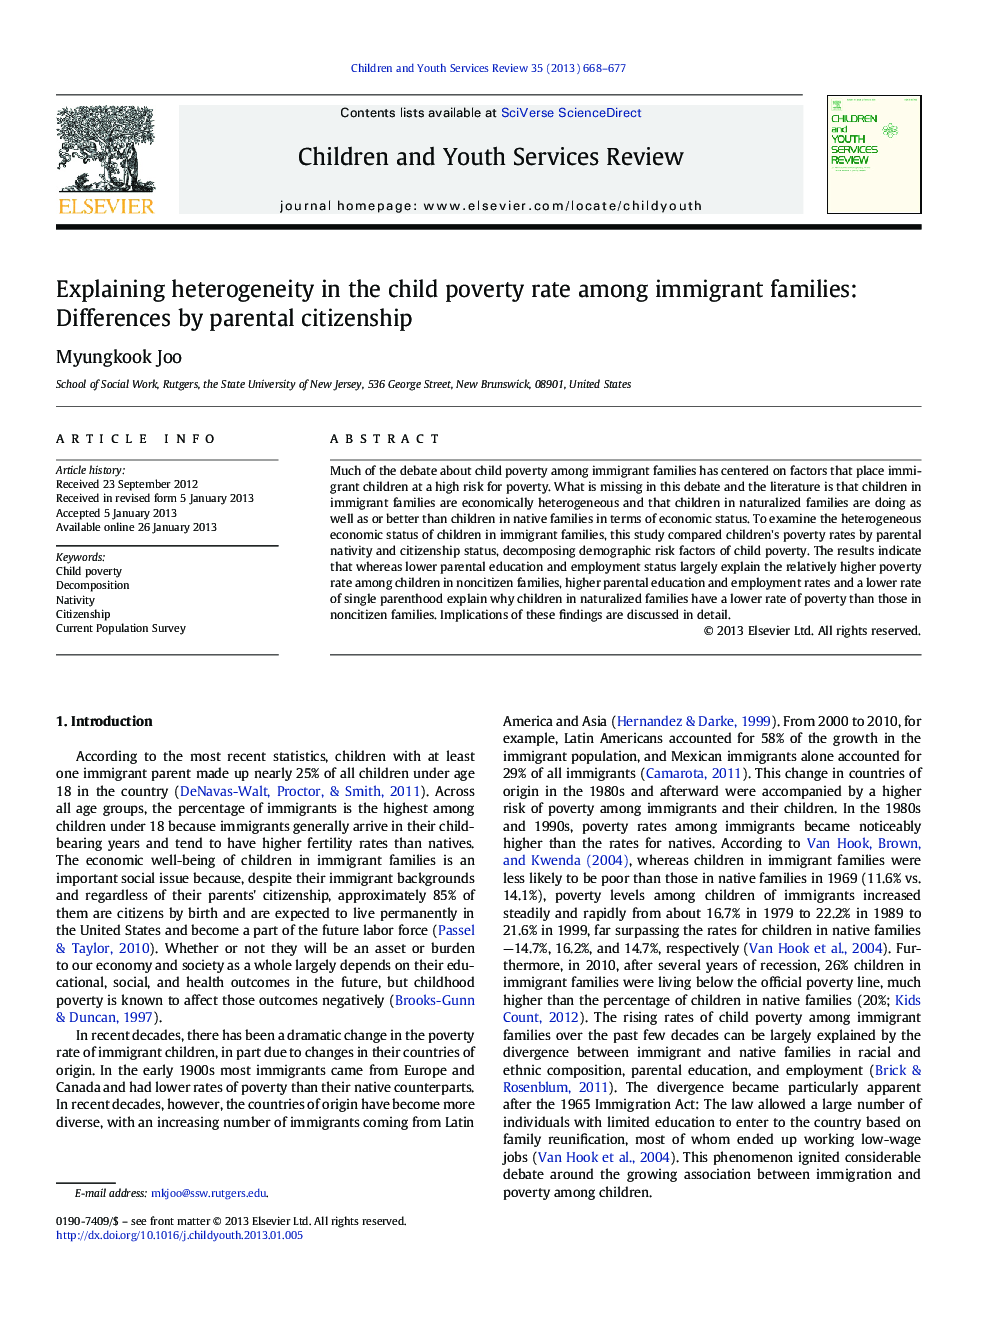 Explaining heterogeneity in the child poverty rate among immigrant families: Differences by parental citizenship